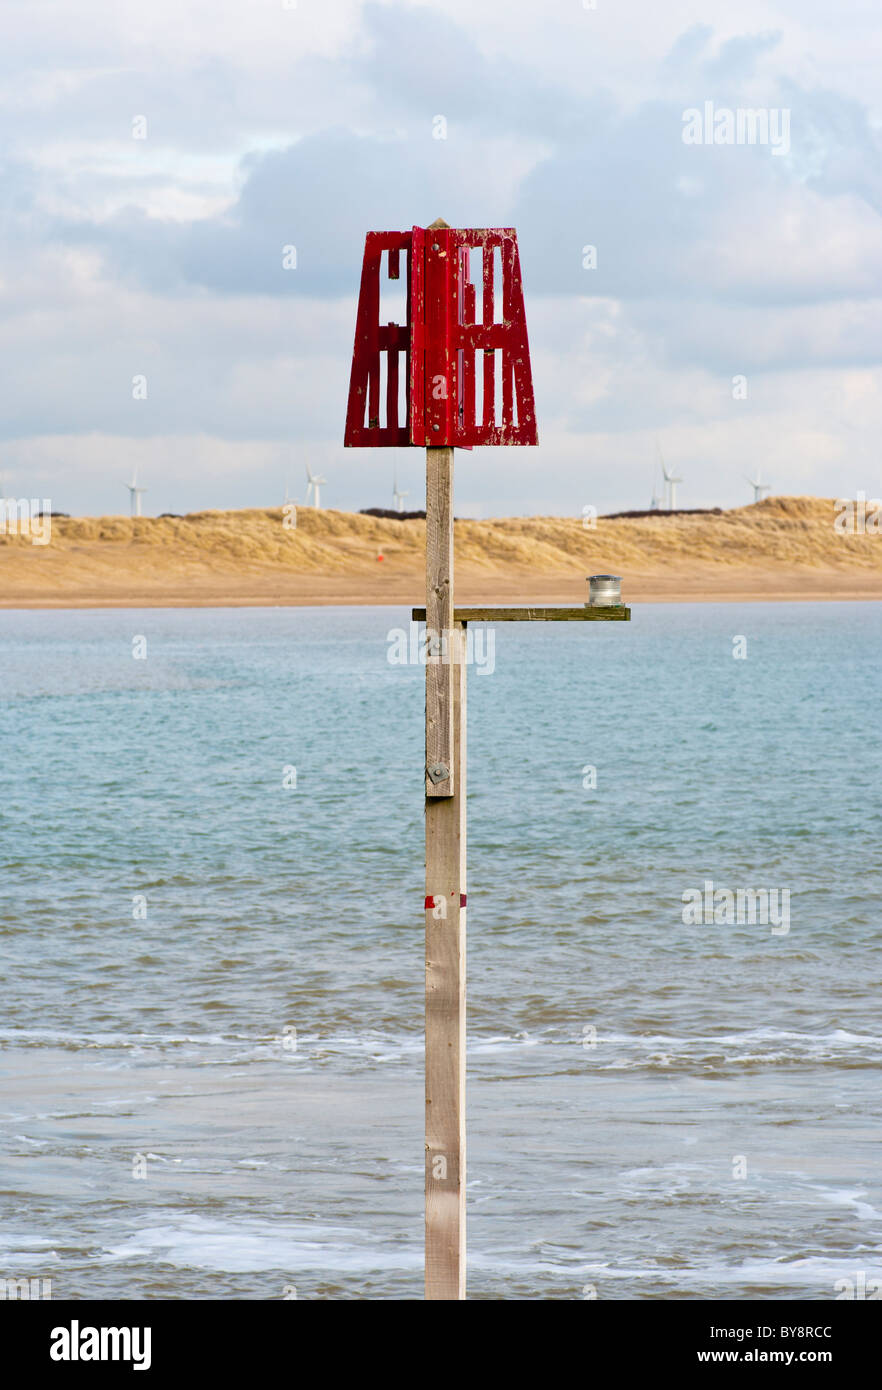 Channel Marker Stock Photos & Channel Marker Stock Images - Alamy